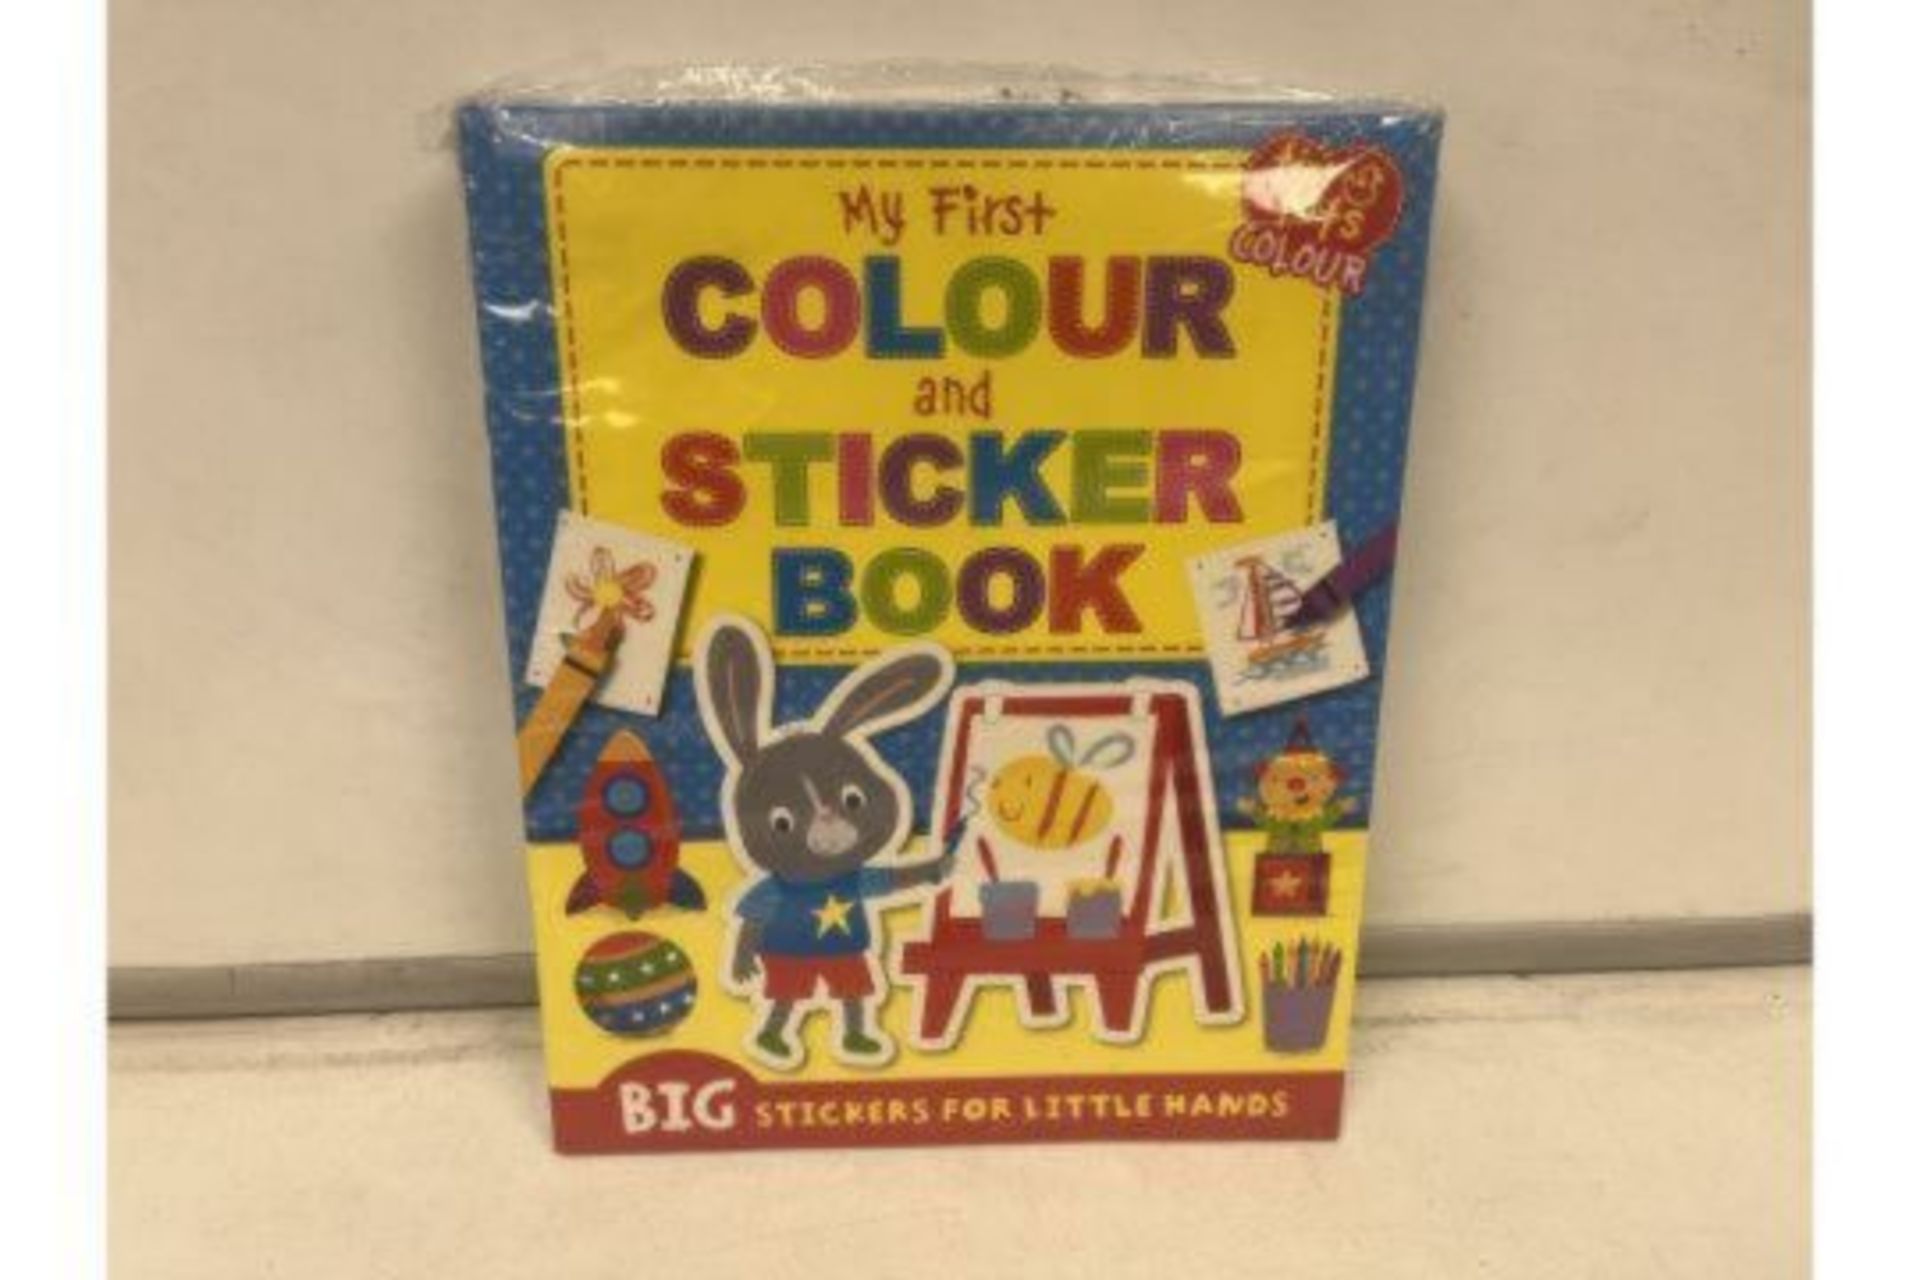 80 X NEW PACKAGED MY FIRST COLOUR & STICKER BOOKS. BIG STICKERS FOR LITTLE HANDS. PRICE MARKED AT £